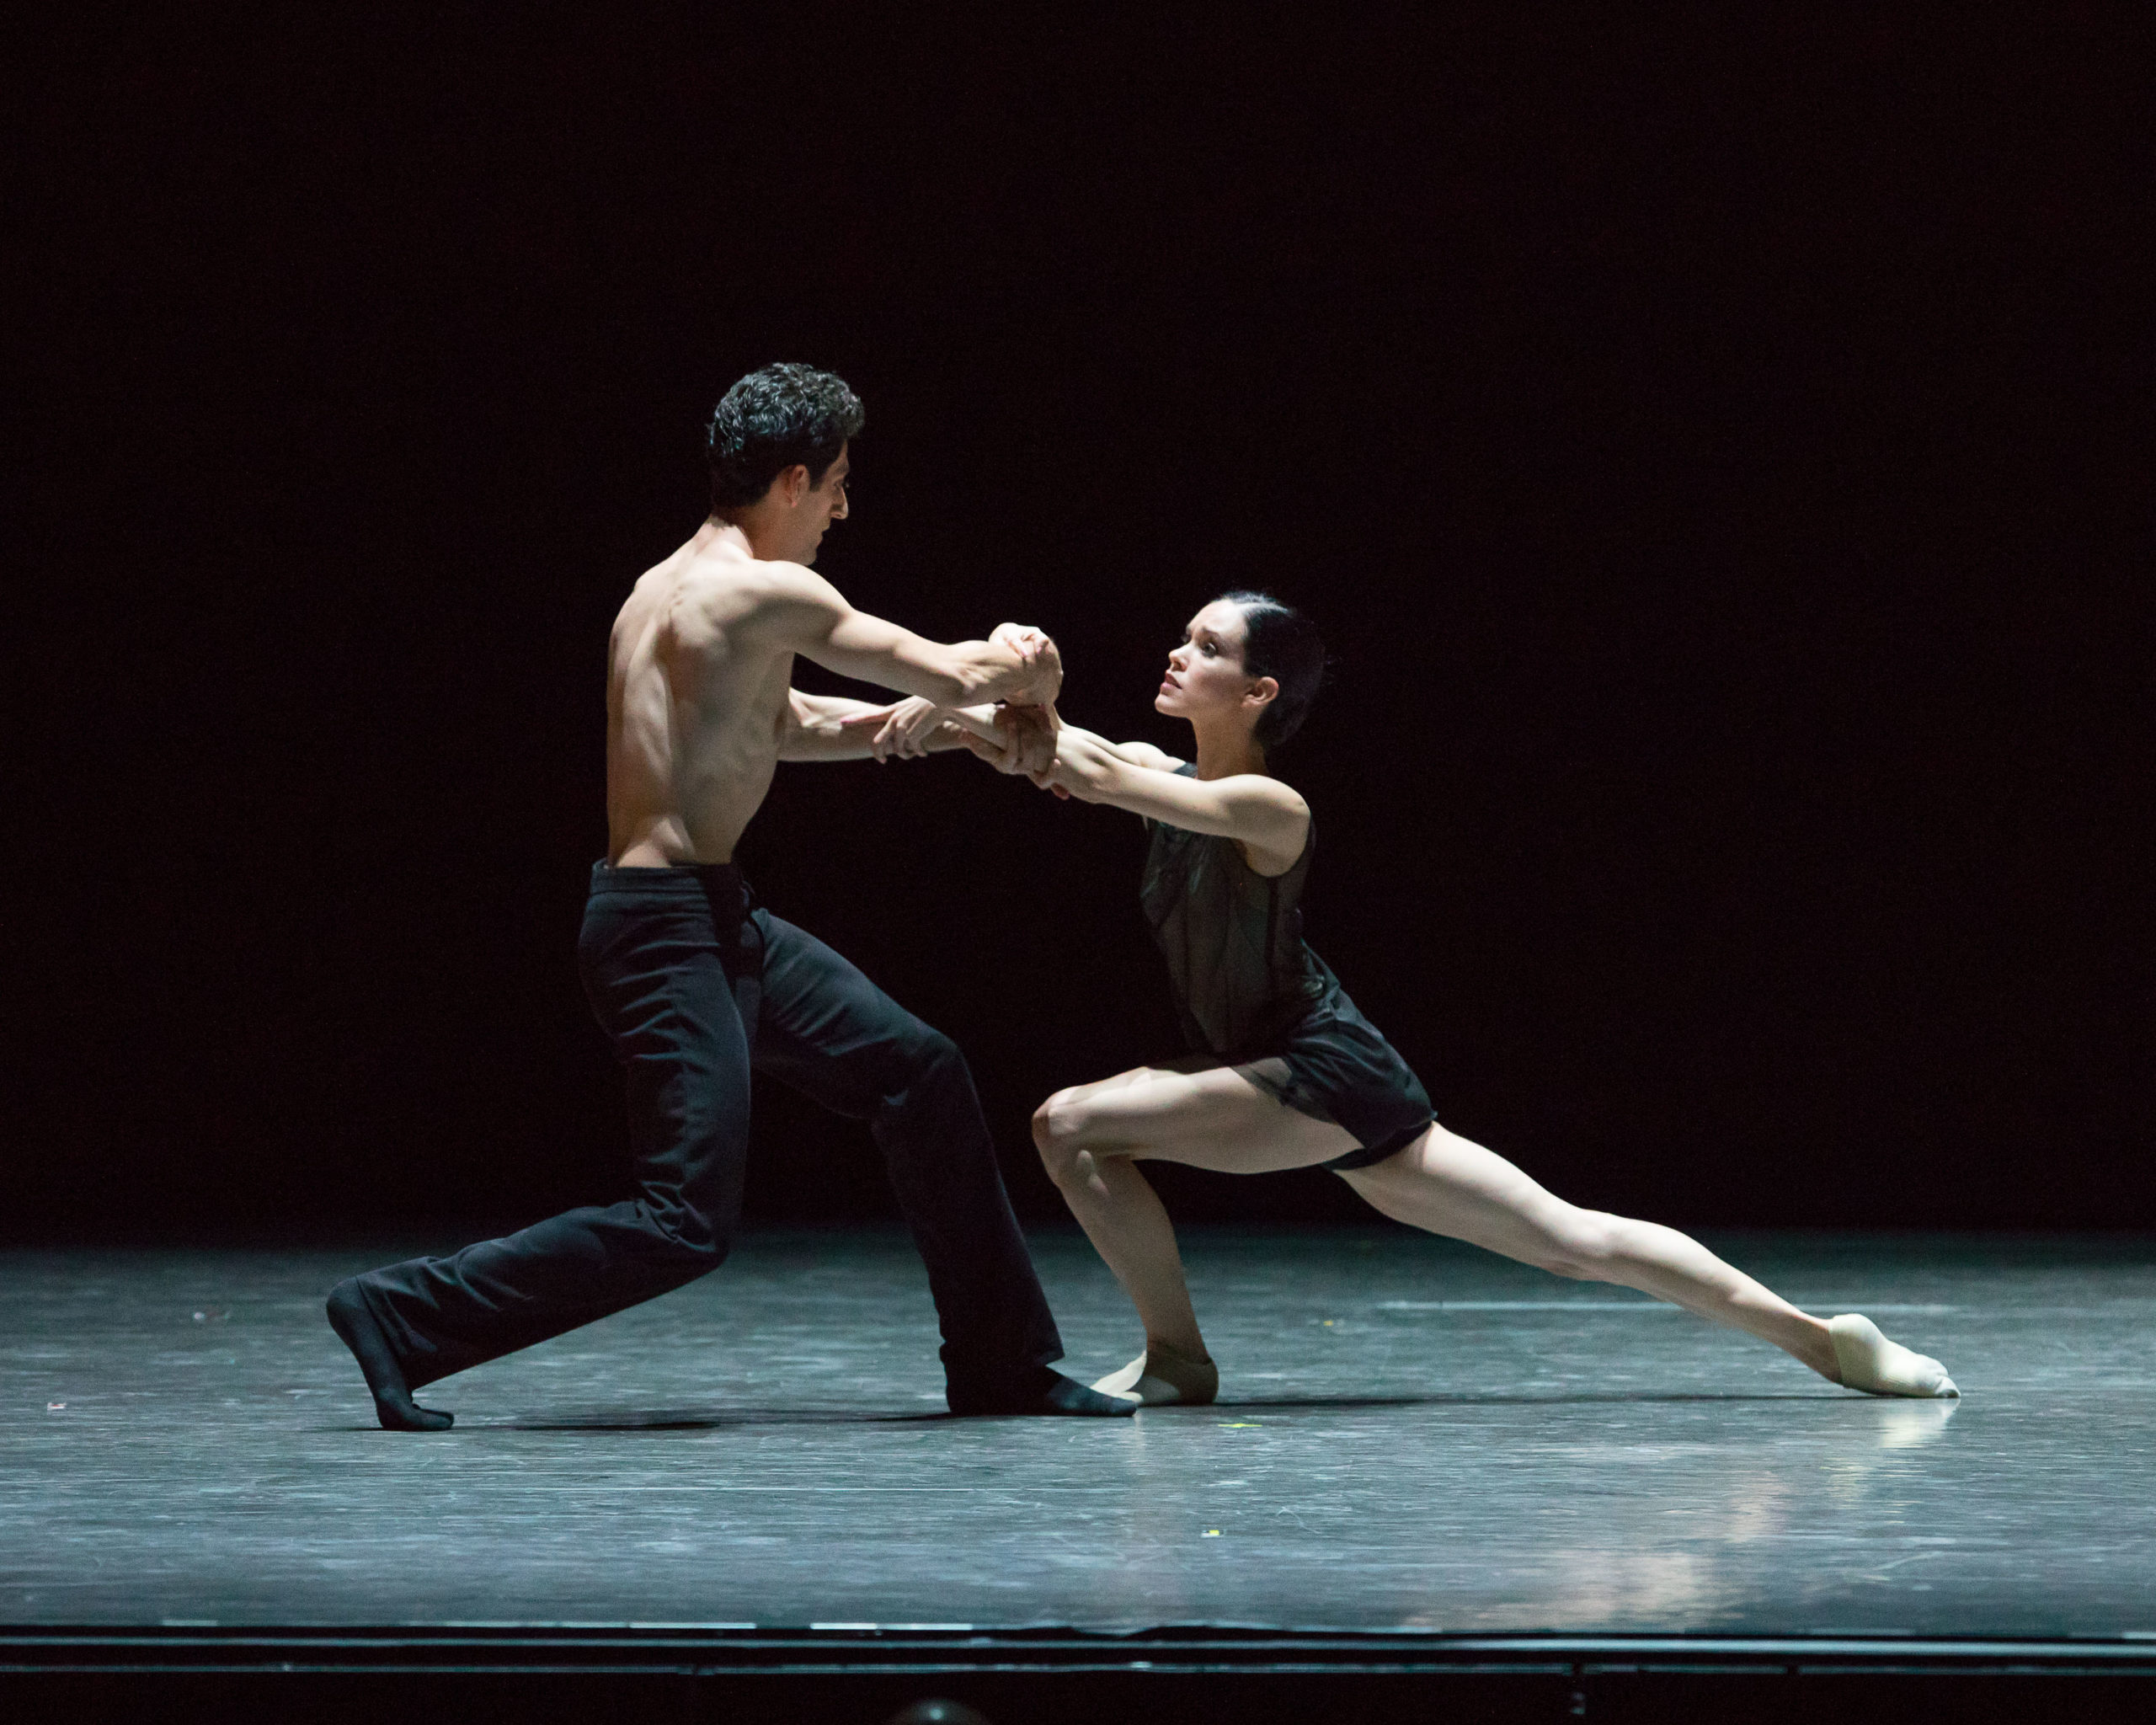 Tigran Sargsyan and Petra Conti firmly grasp each other's forearms, arms crossed as they gaze into each other's eyes. Conti is in a low lunge, her right leg extended back with pointed toes.